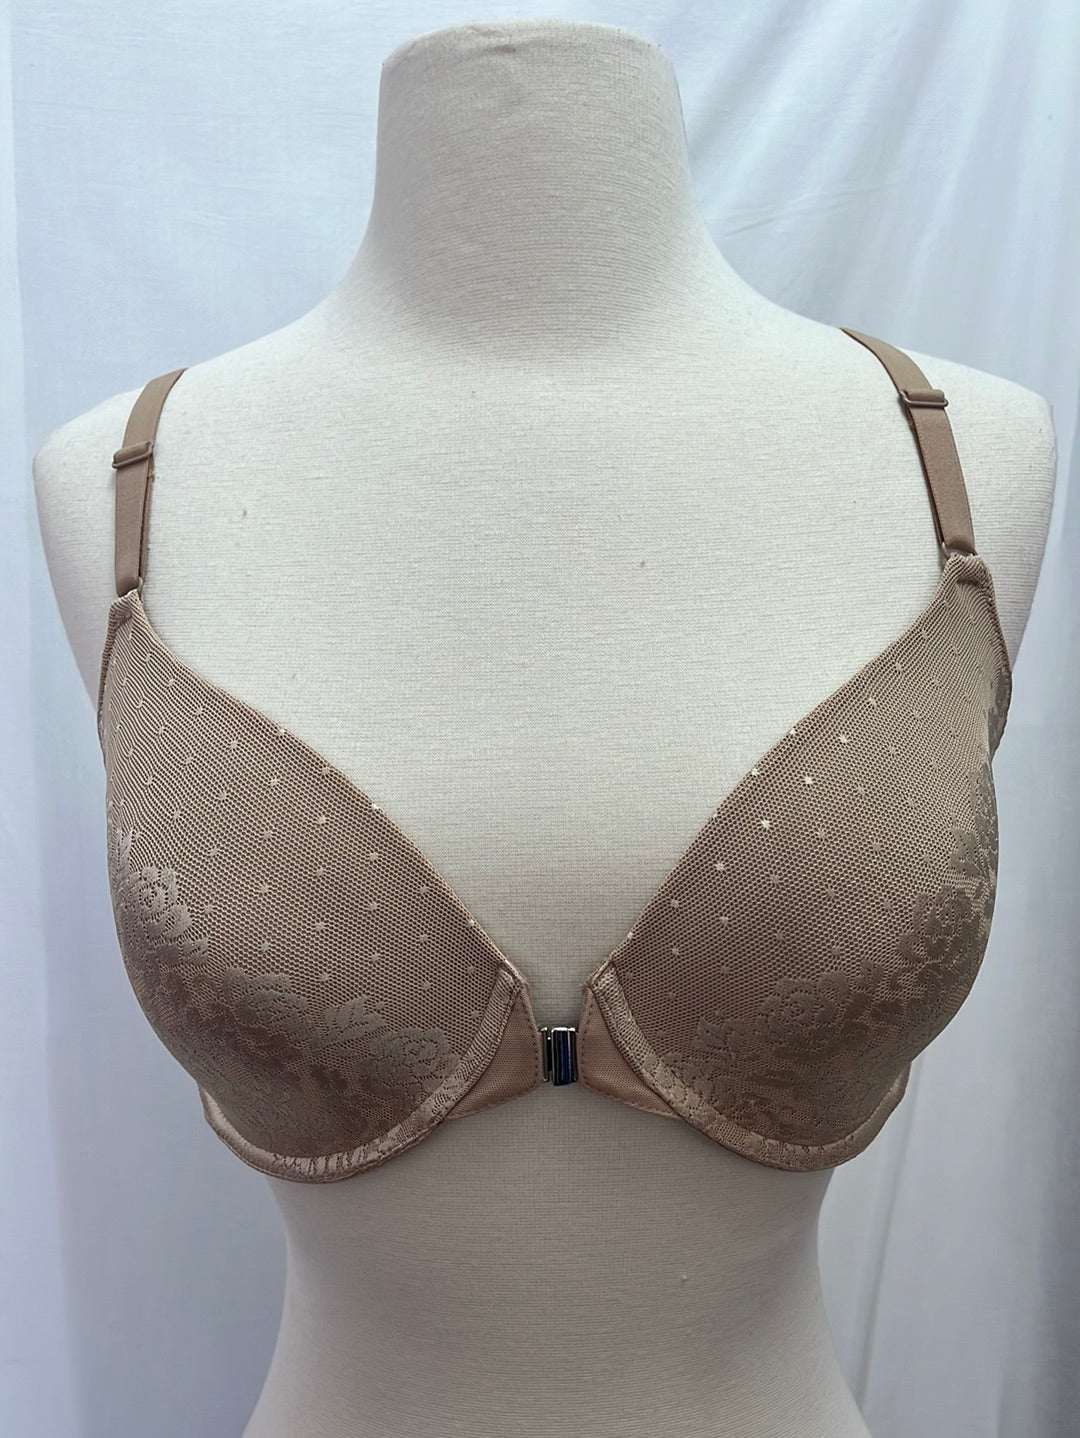 NWT -- SOMA Stunning Support Nude Floral Lace Posture Bra -- Size